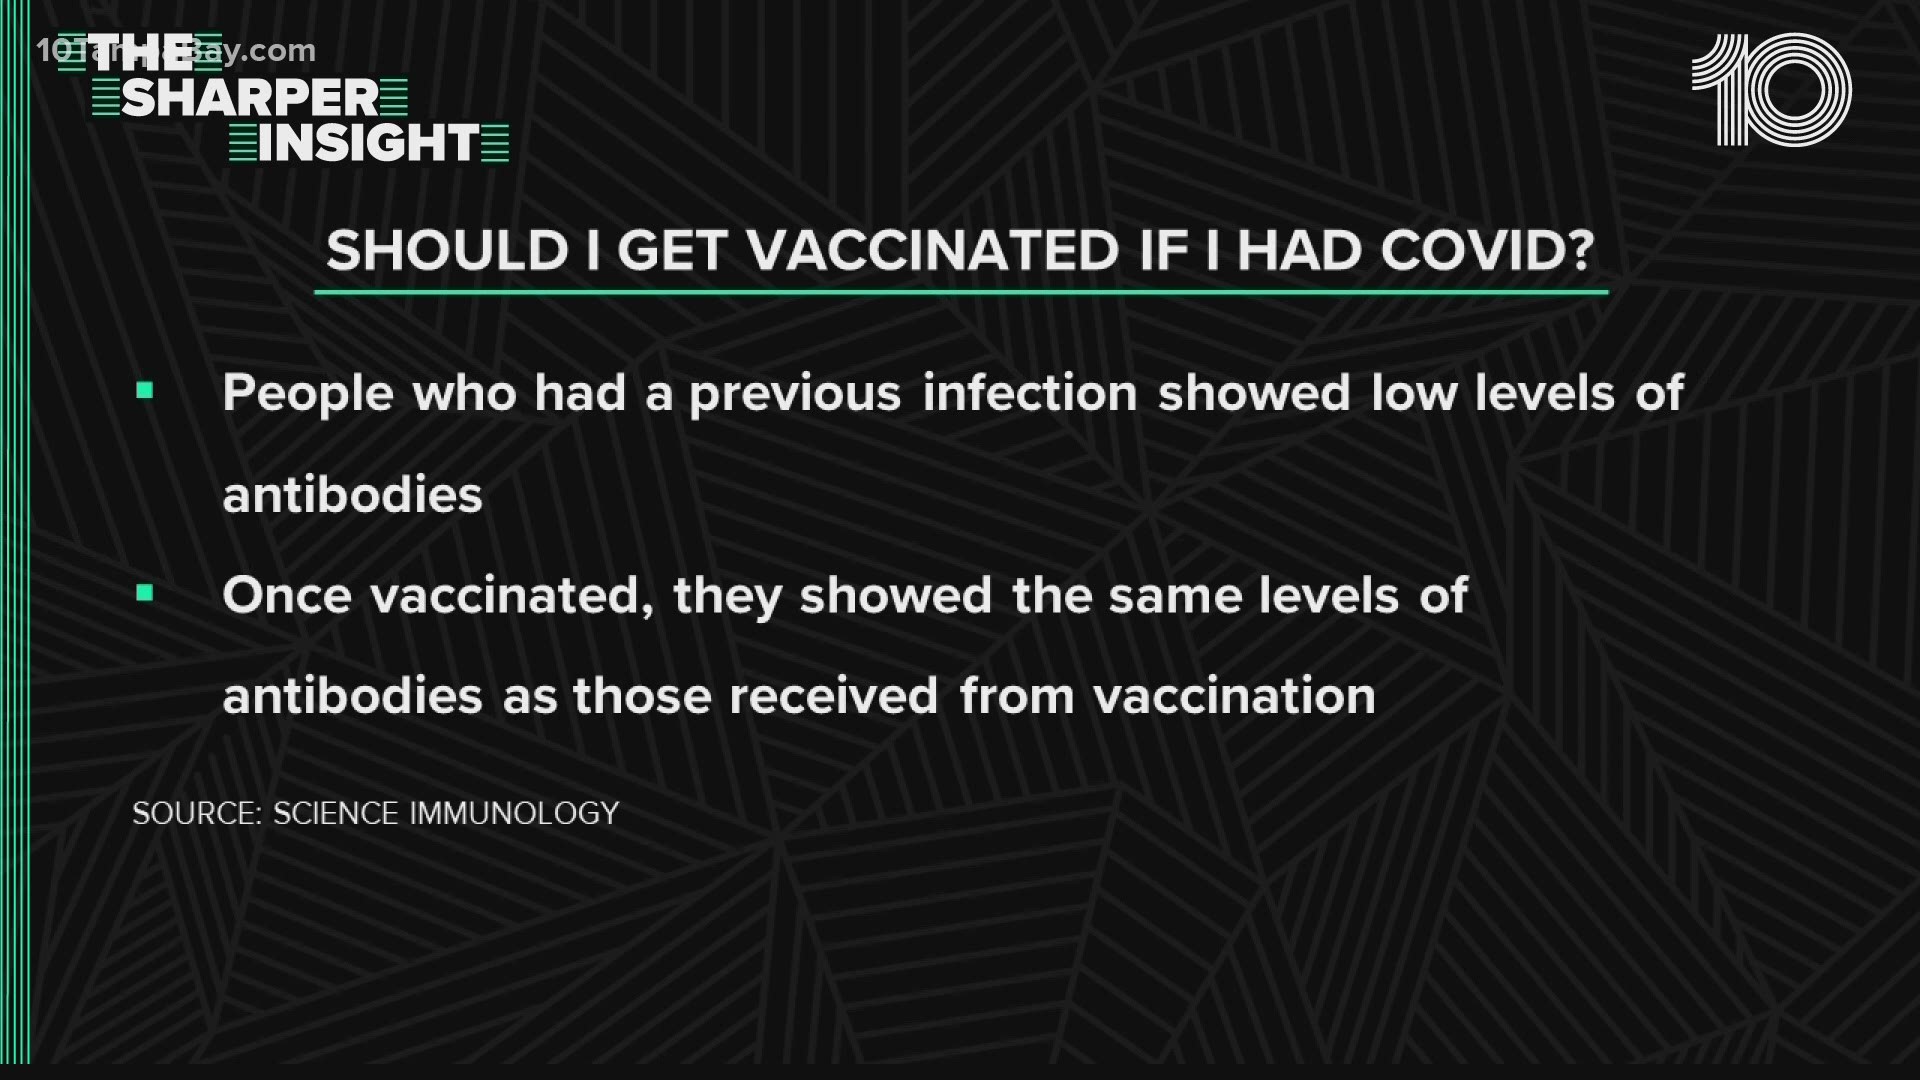 While you may have some immunity after recovering from COVID, experts say it's not as good as what you'll get from the vaccine.